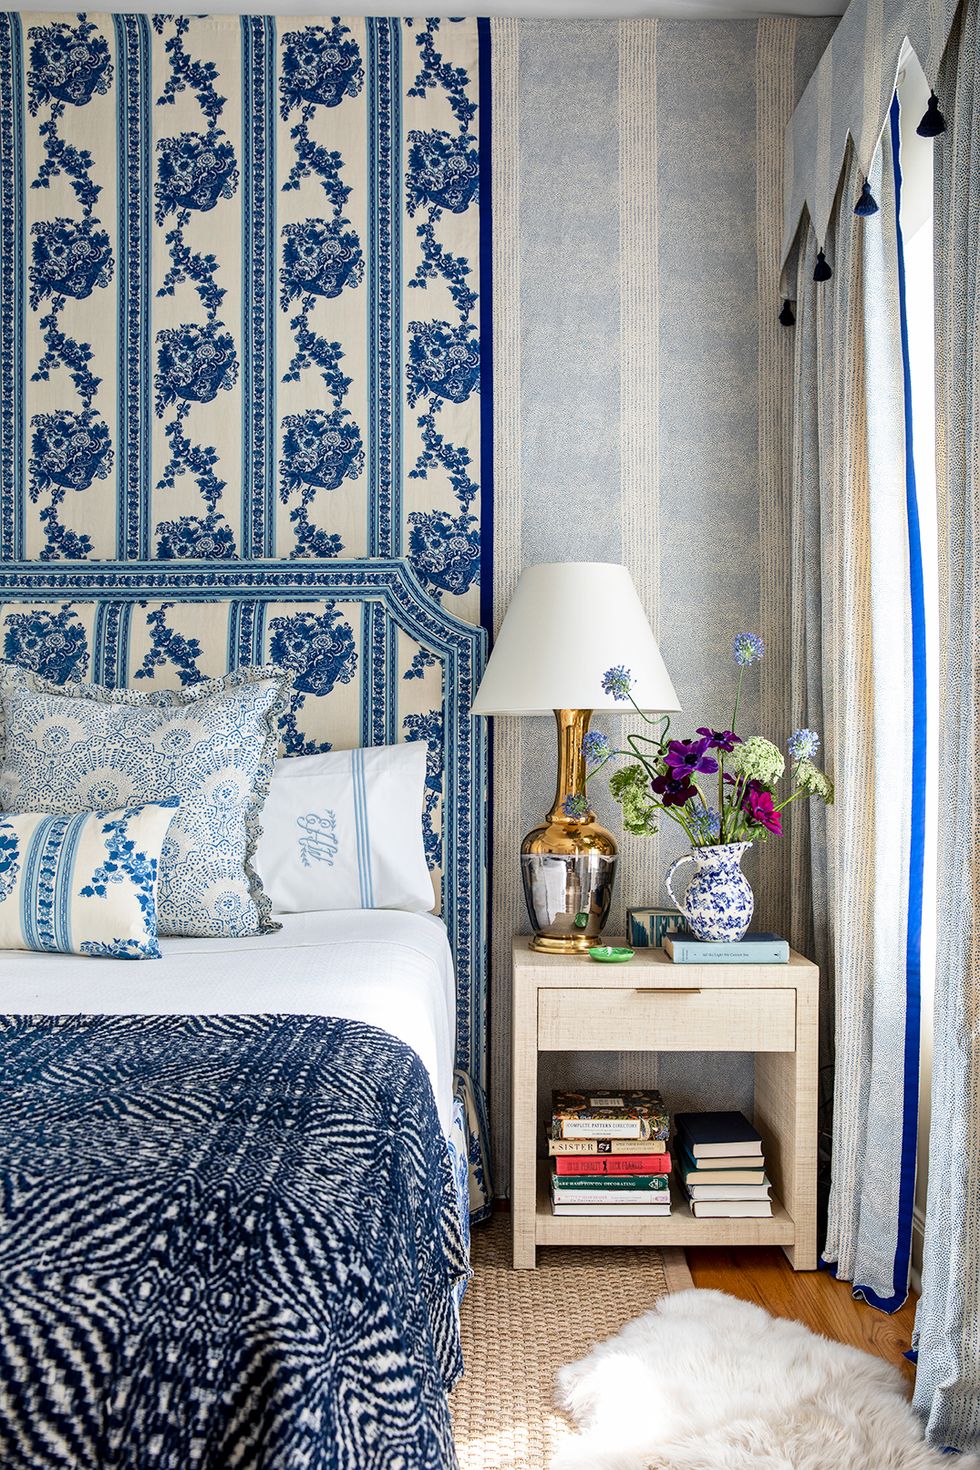 15 Wall Covering Ideas To Fall in Love With